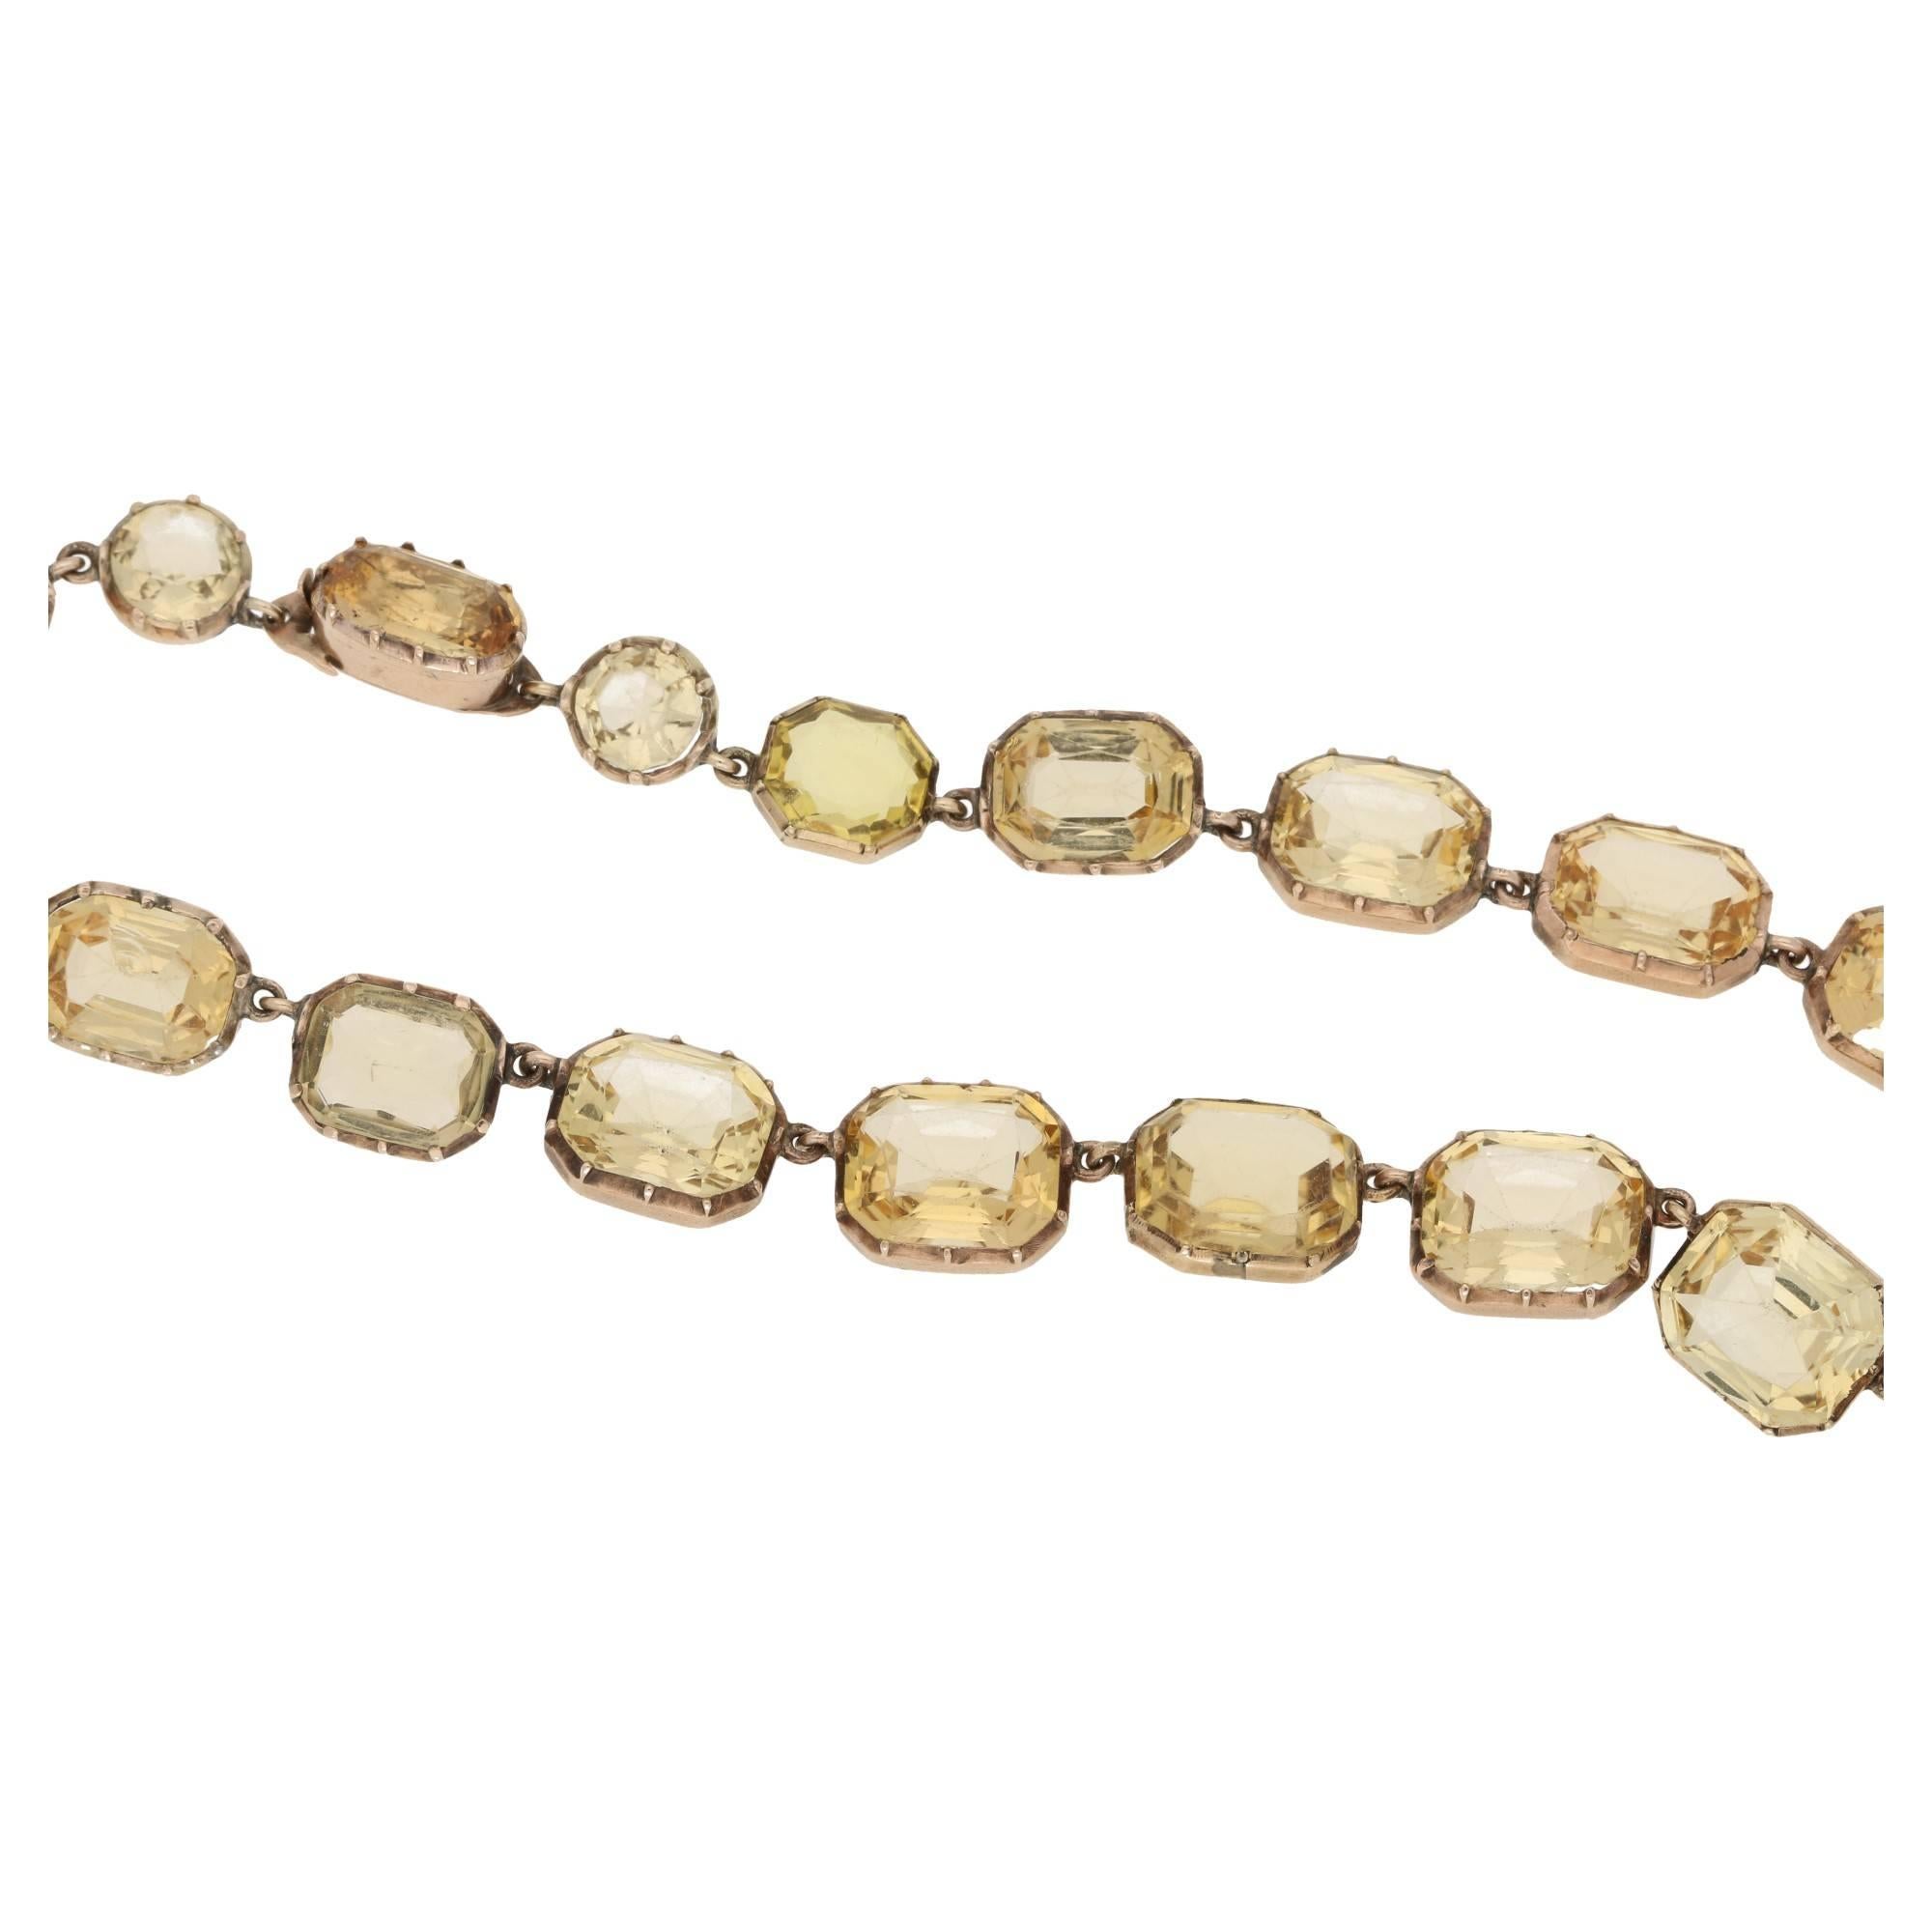 An important Victorian Imperial topaz riviere necklace set in  yellow gold. Comprising of long oval topaz hiding a tongue in groove clasp, shouldered by a pair of round faceted topaz's and completed with twenty five graduated rectangular scissor cut